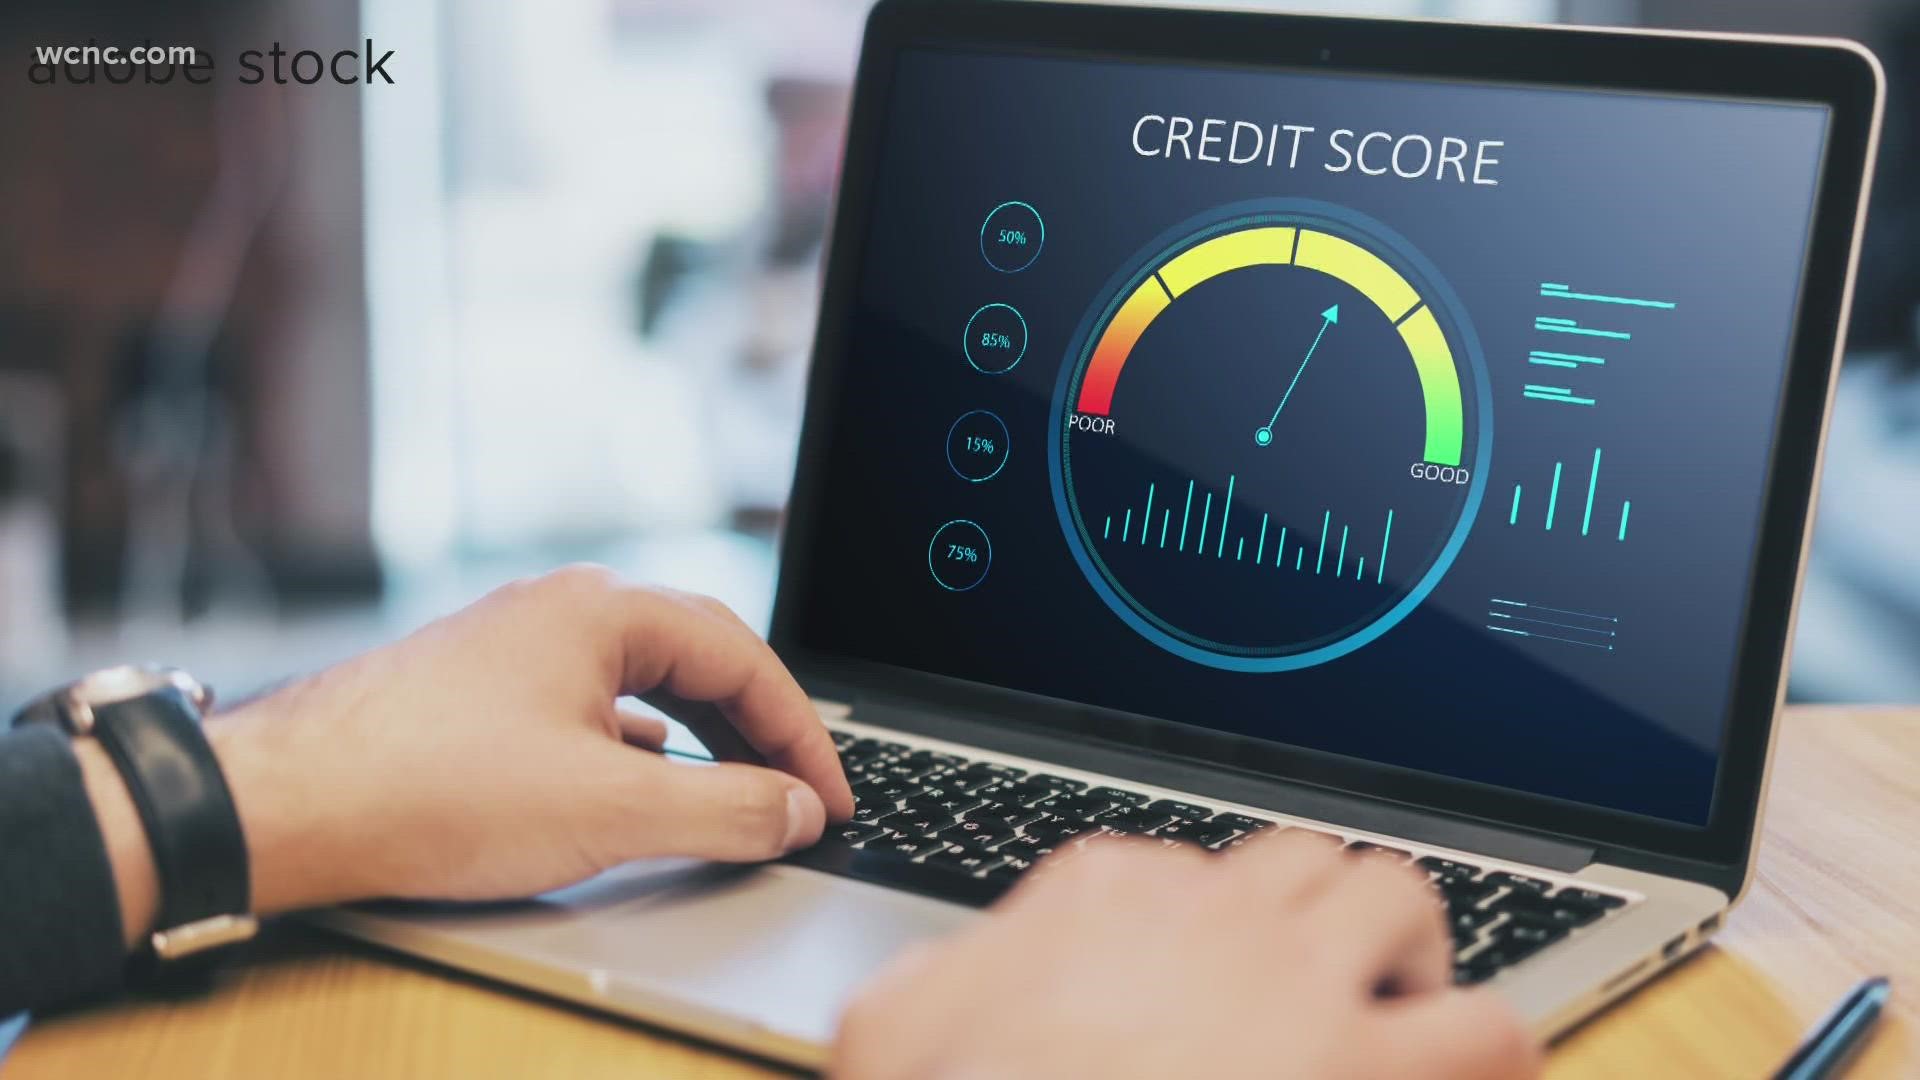 Talking about credit isn’t the most exciting topic but it sure is important, because your credit score dictates so many of life's major decisions.